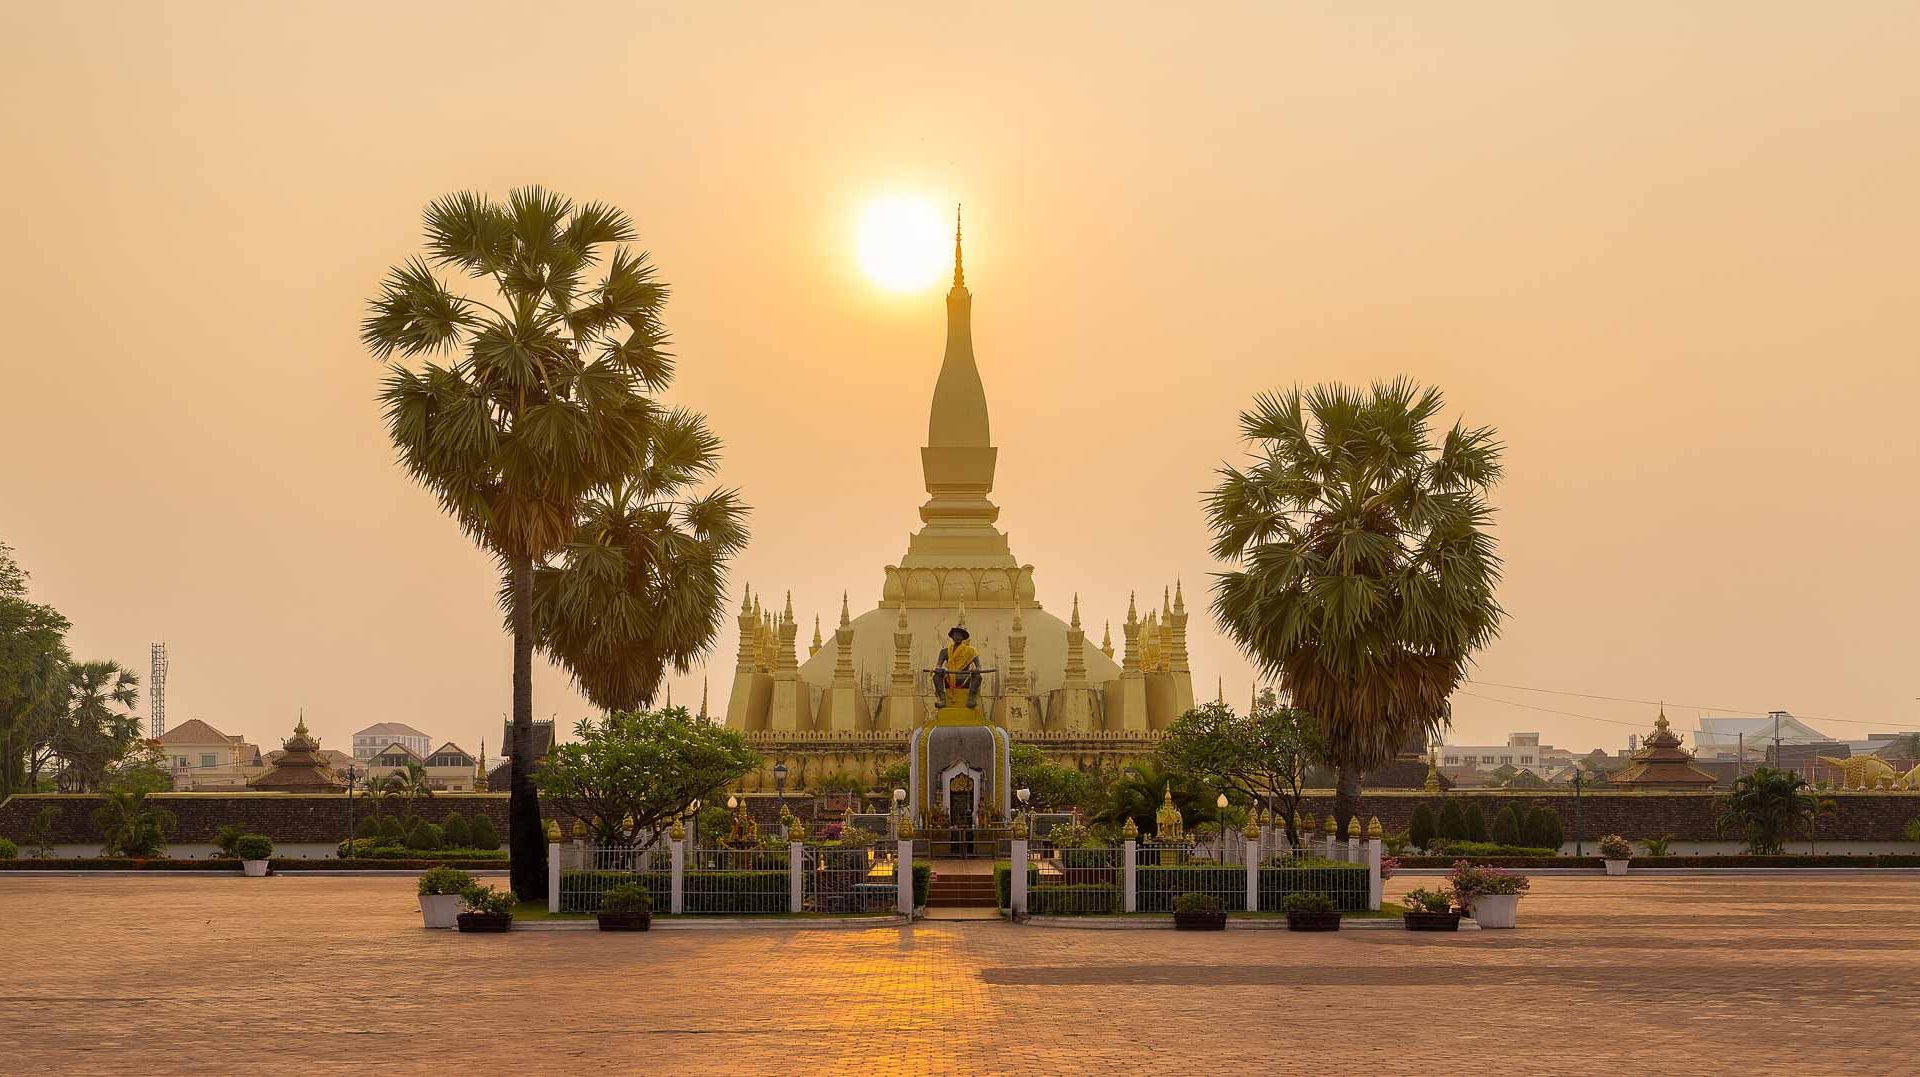 The sun rises over Pha That Luang.